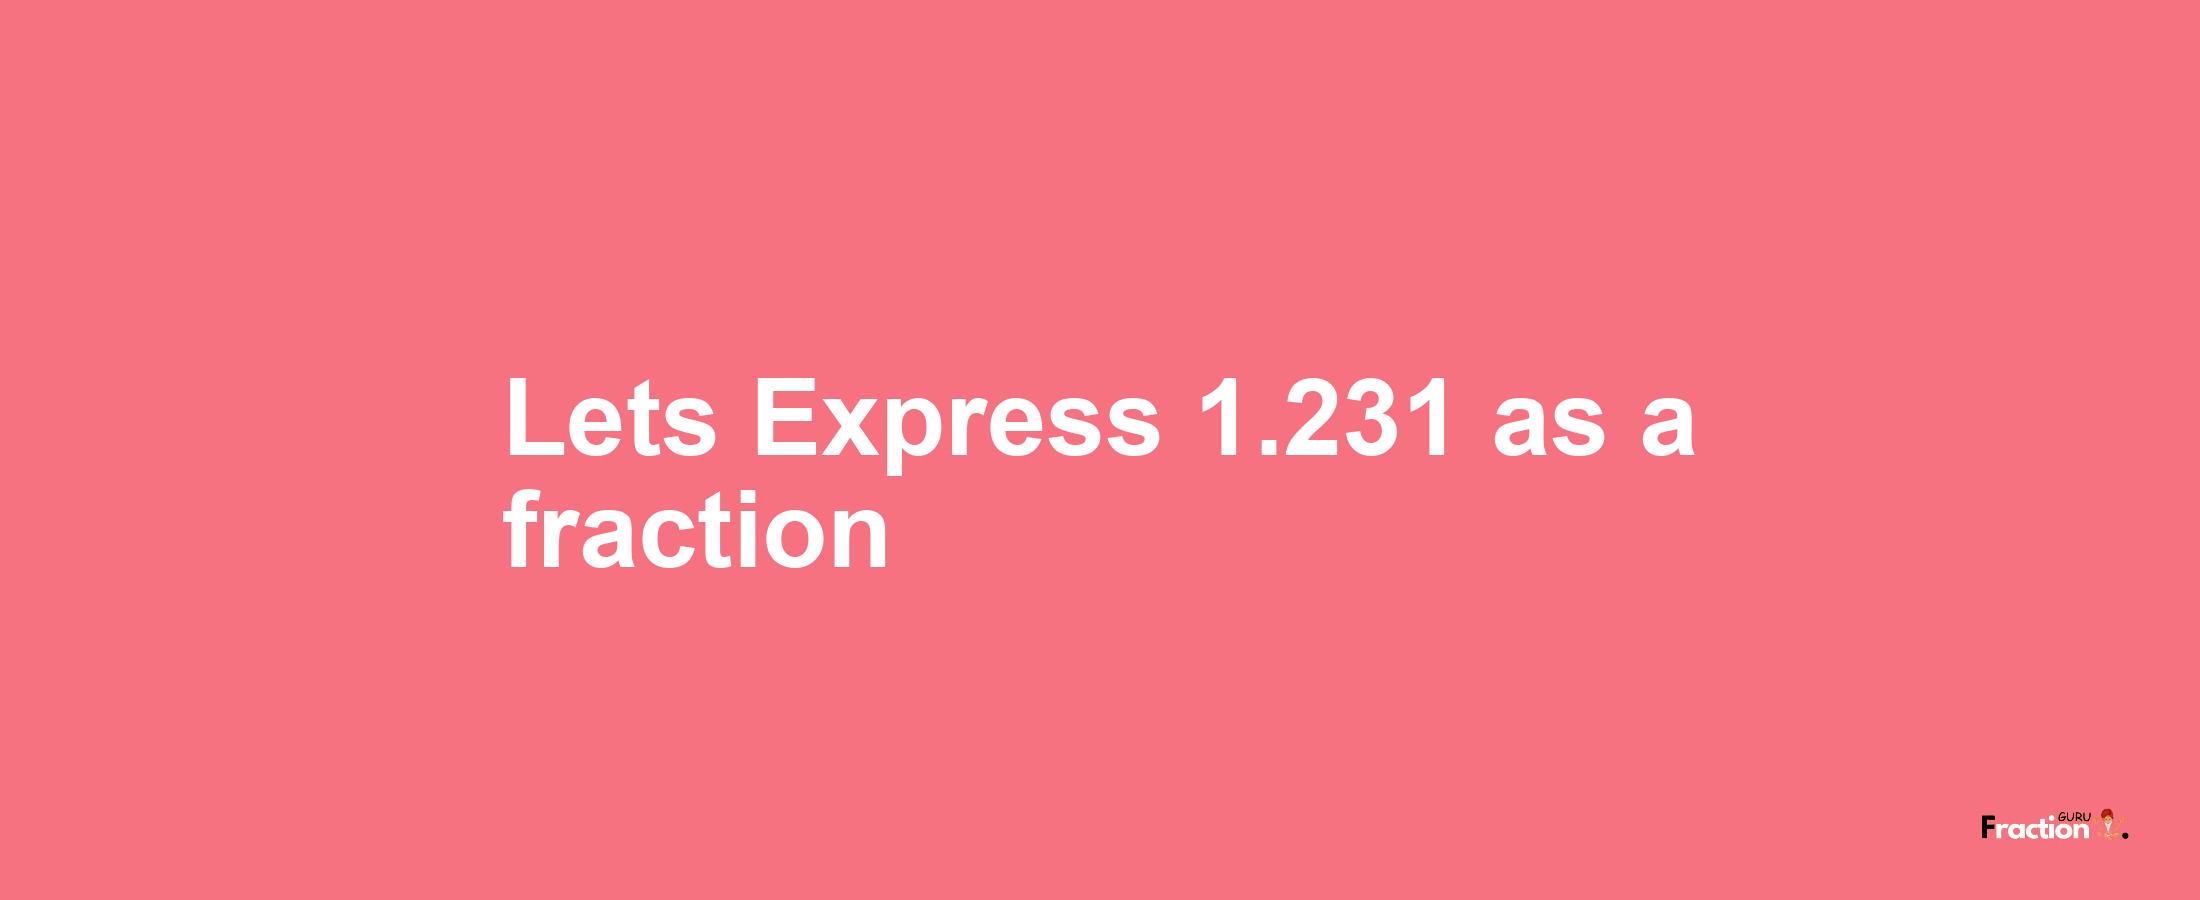 Lets Express 1.231 as afraction